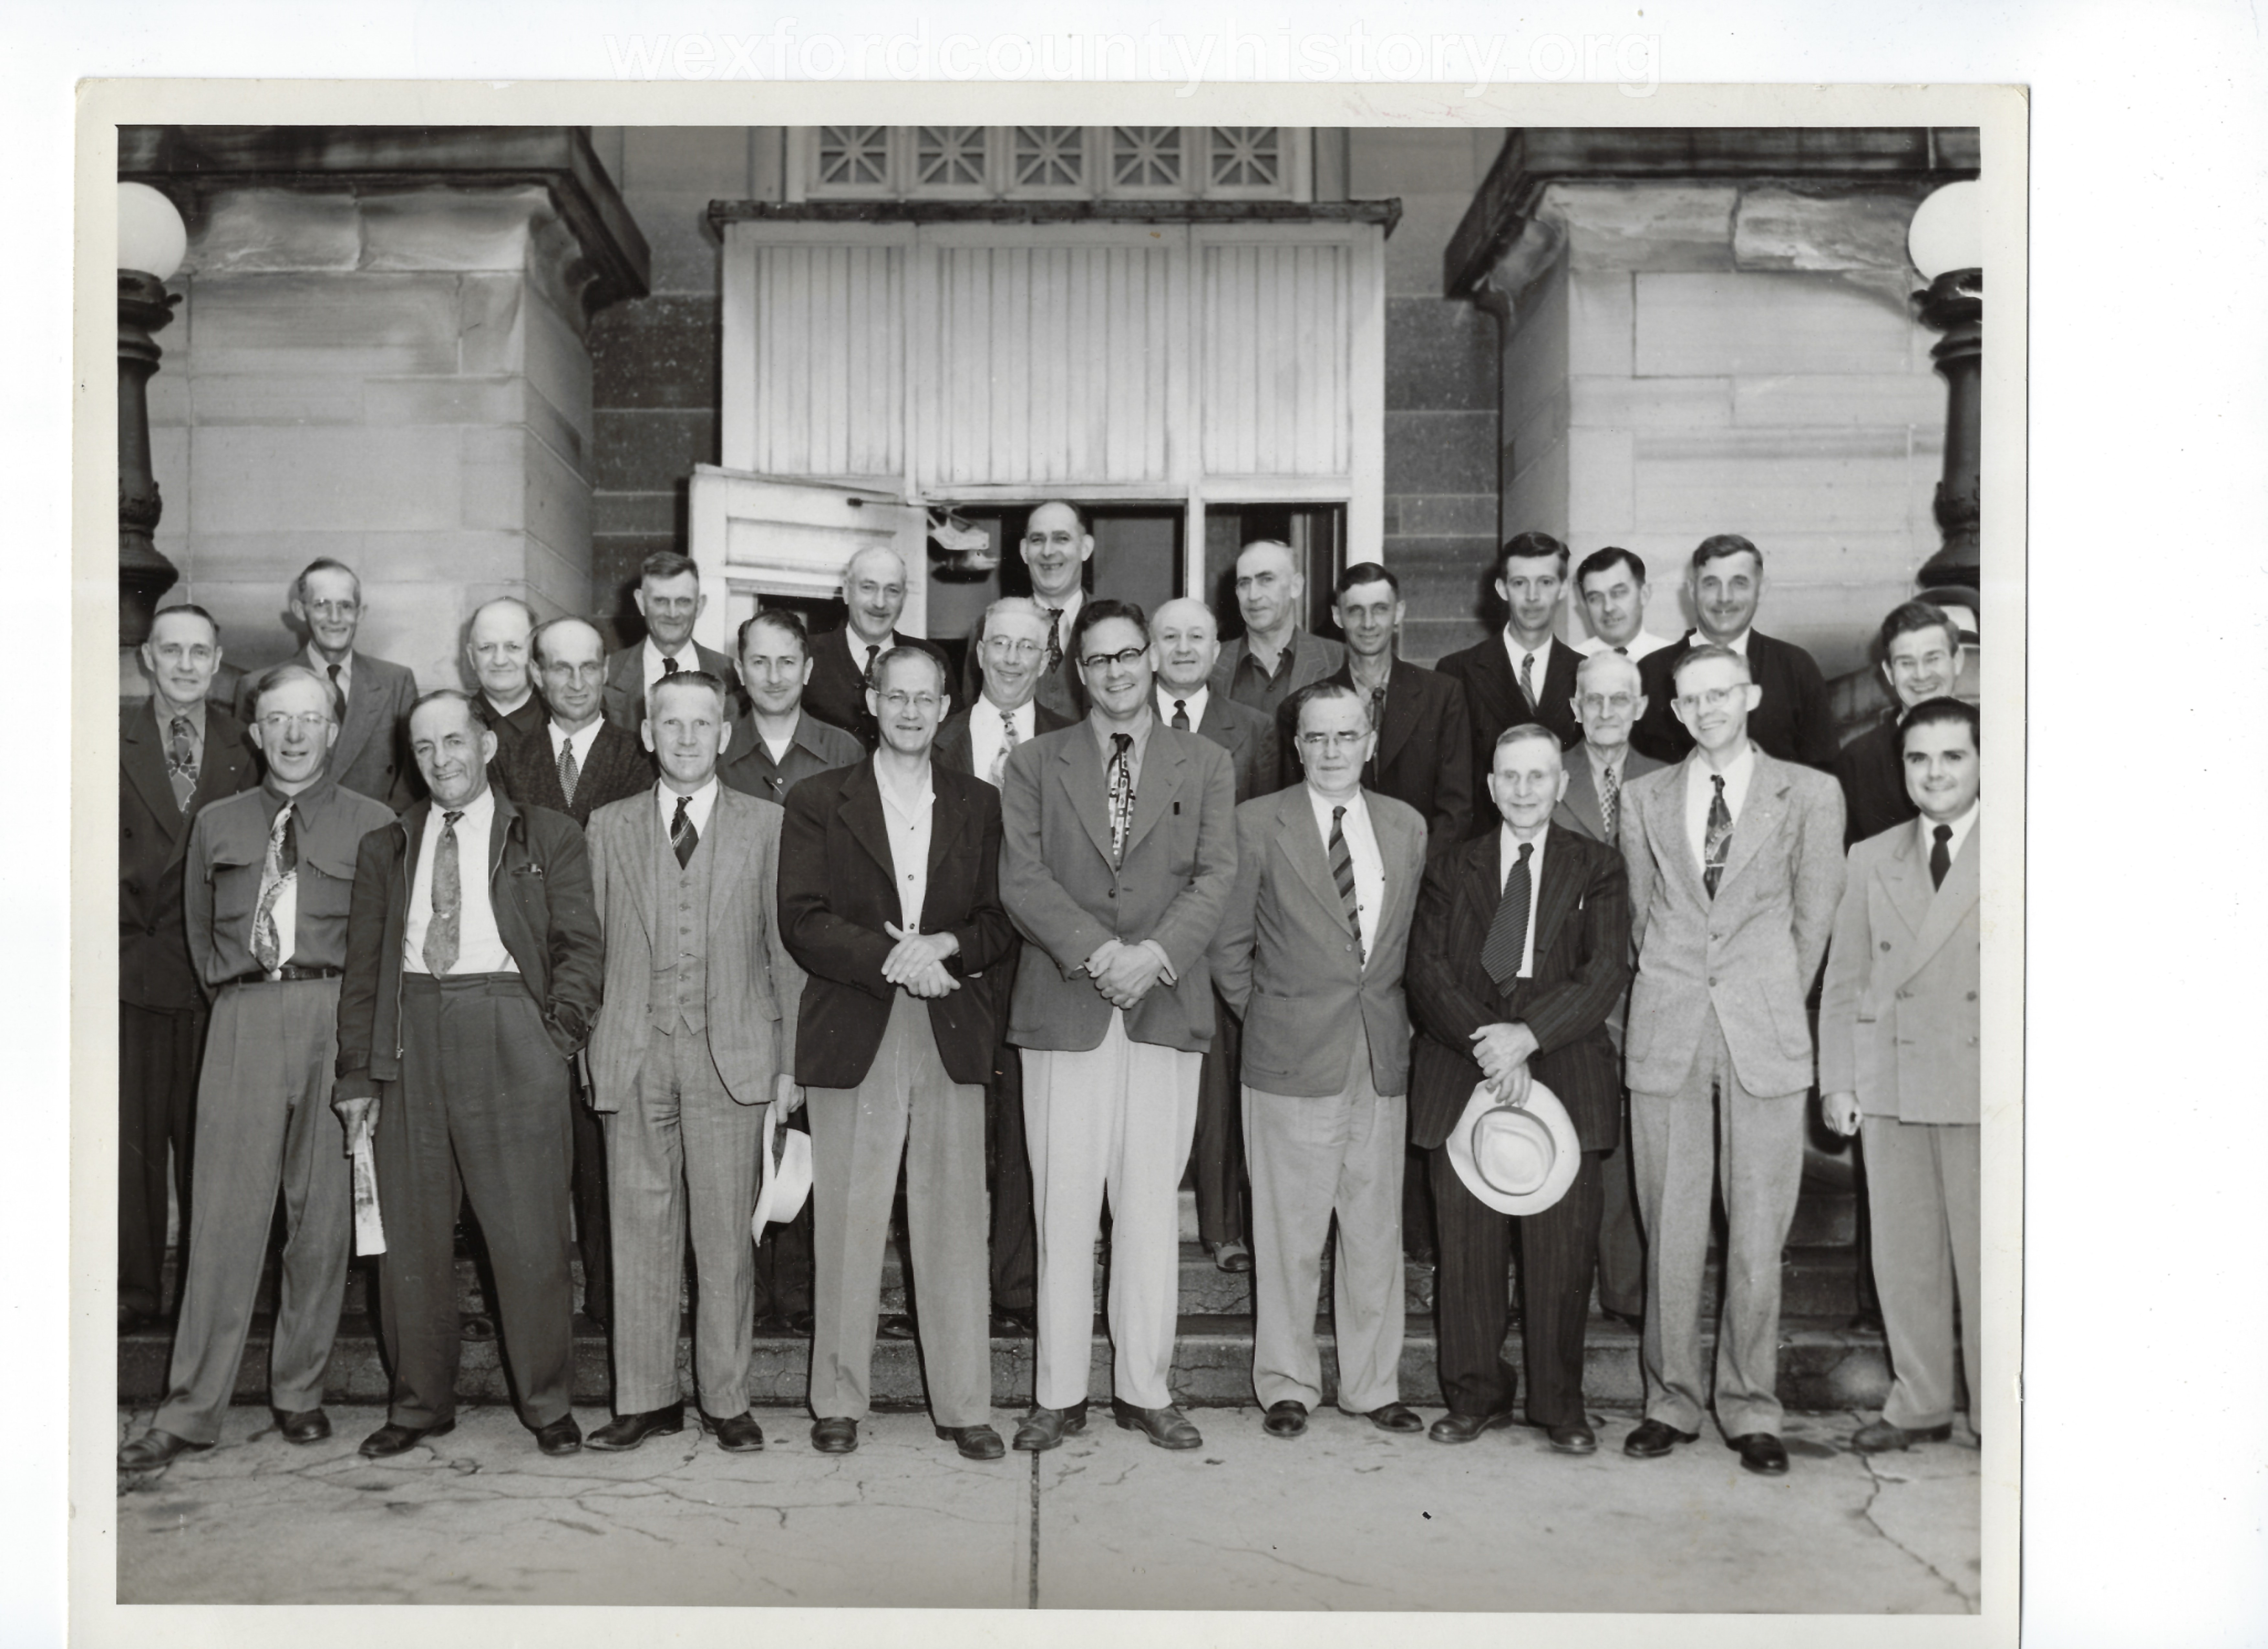 Wexford County Board Of Supervisors, 1951